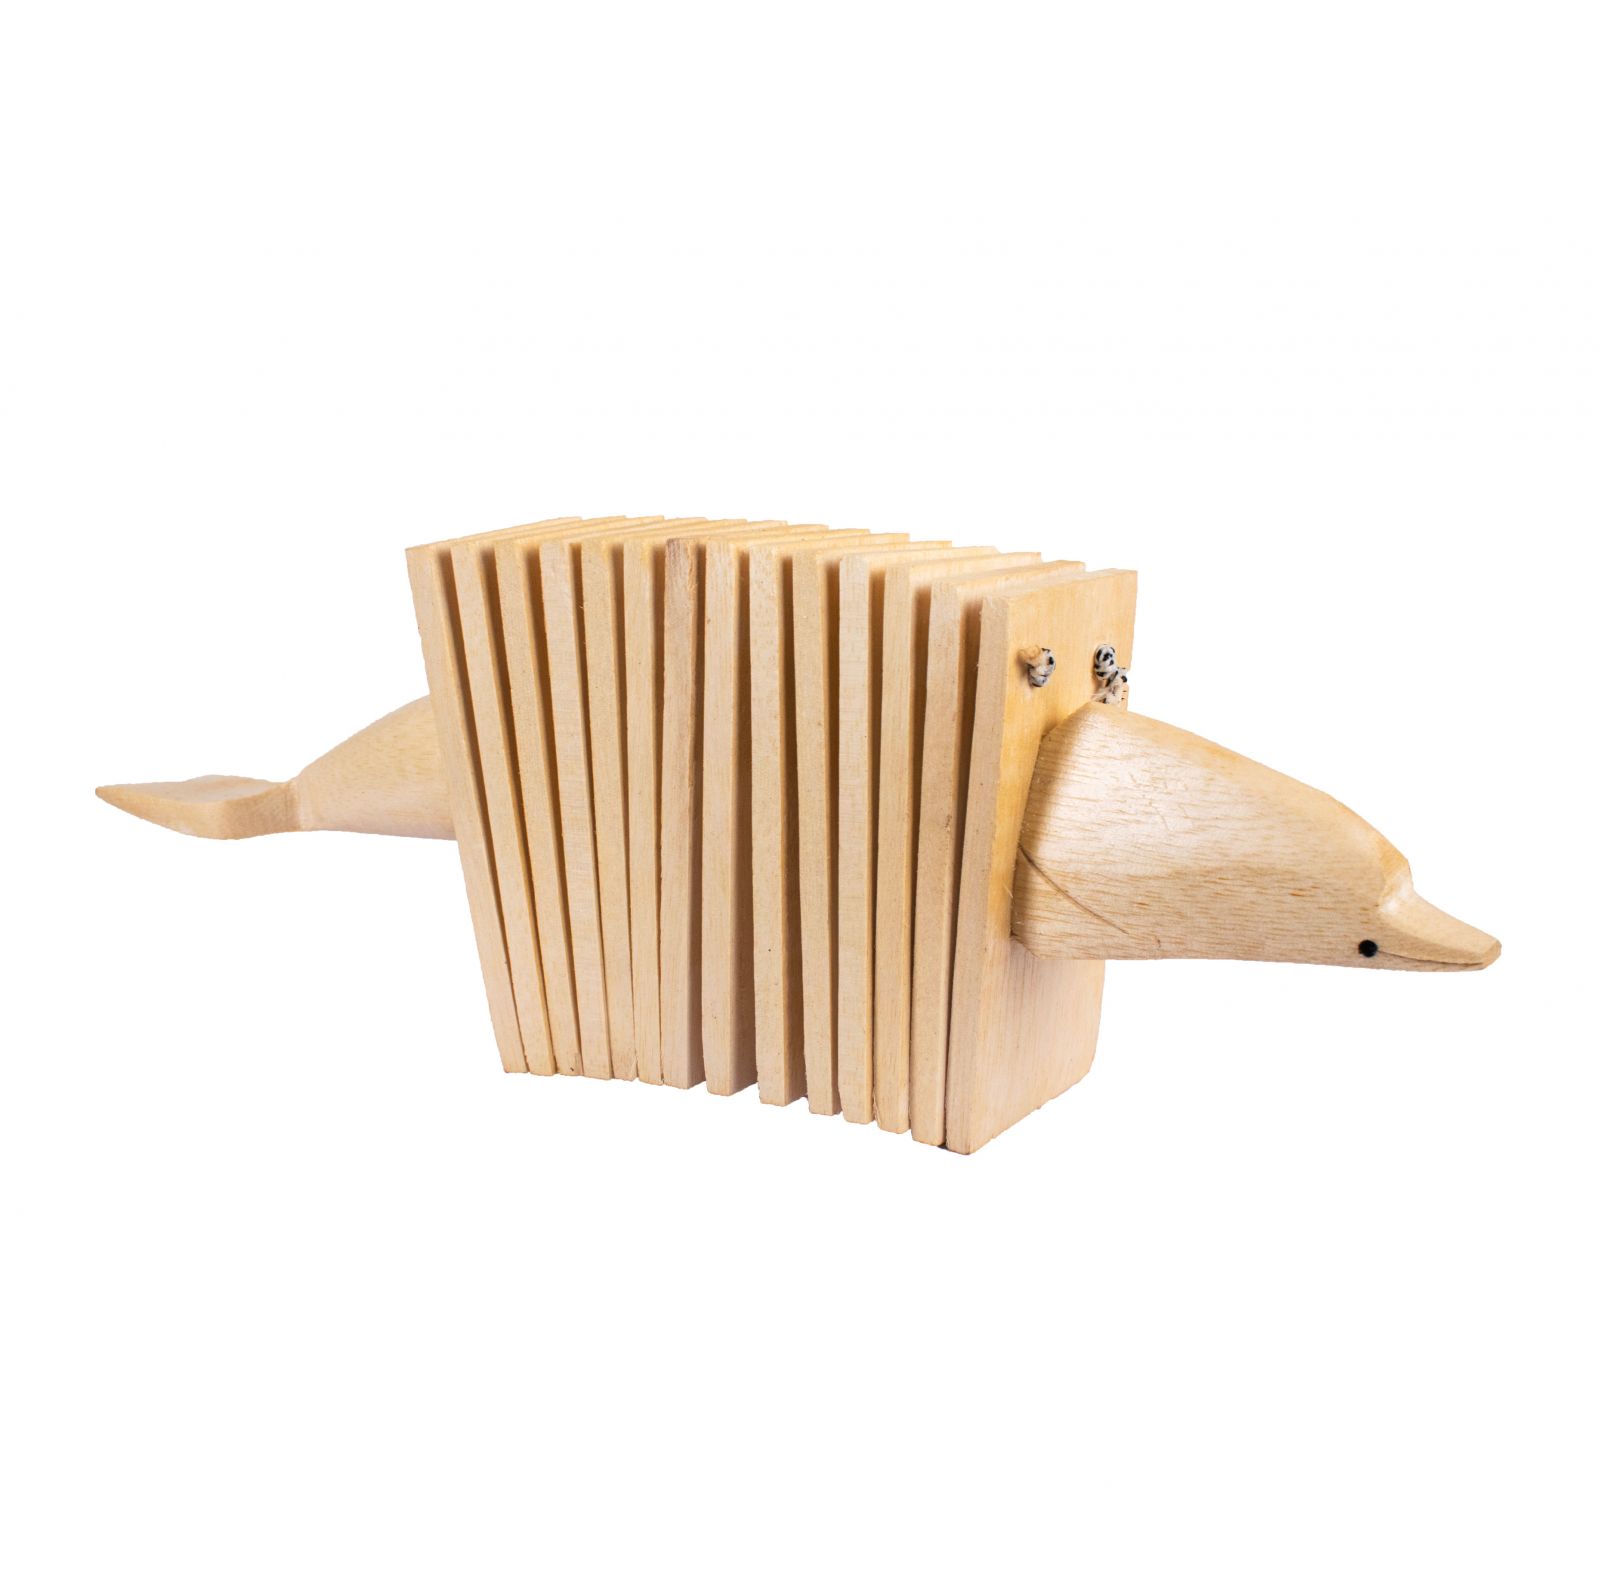 Wooden rattle in the shape of an accordion - Dolphin Indonesia